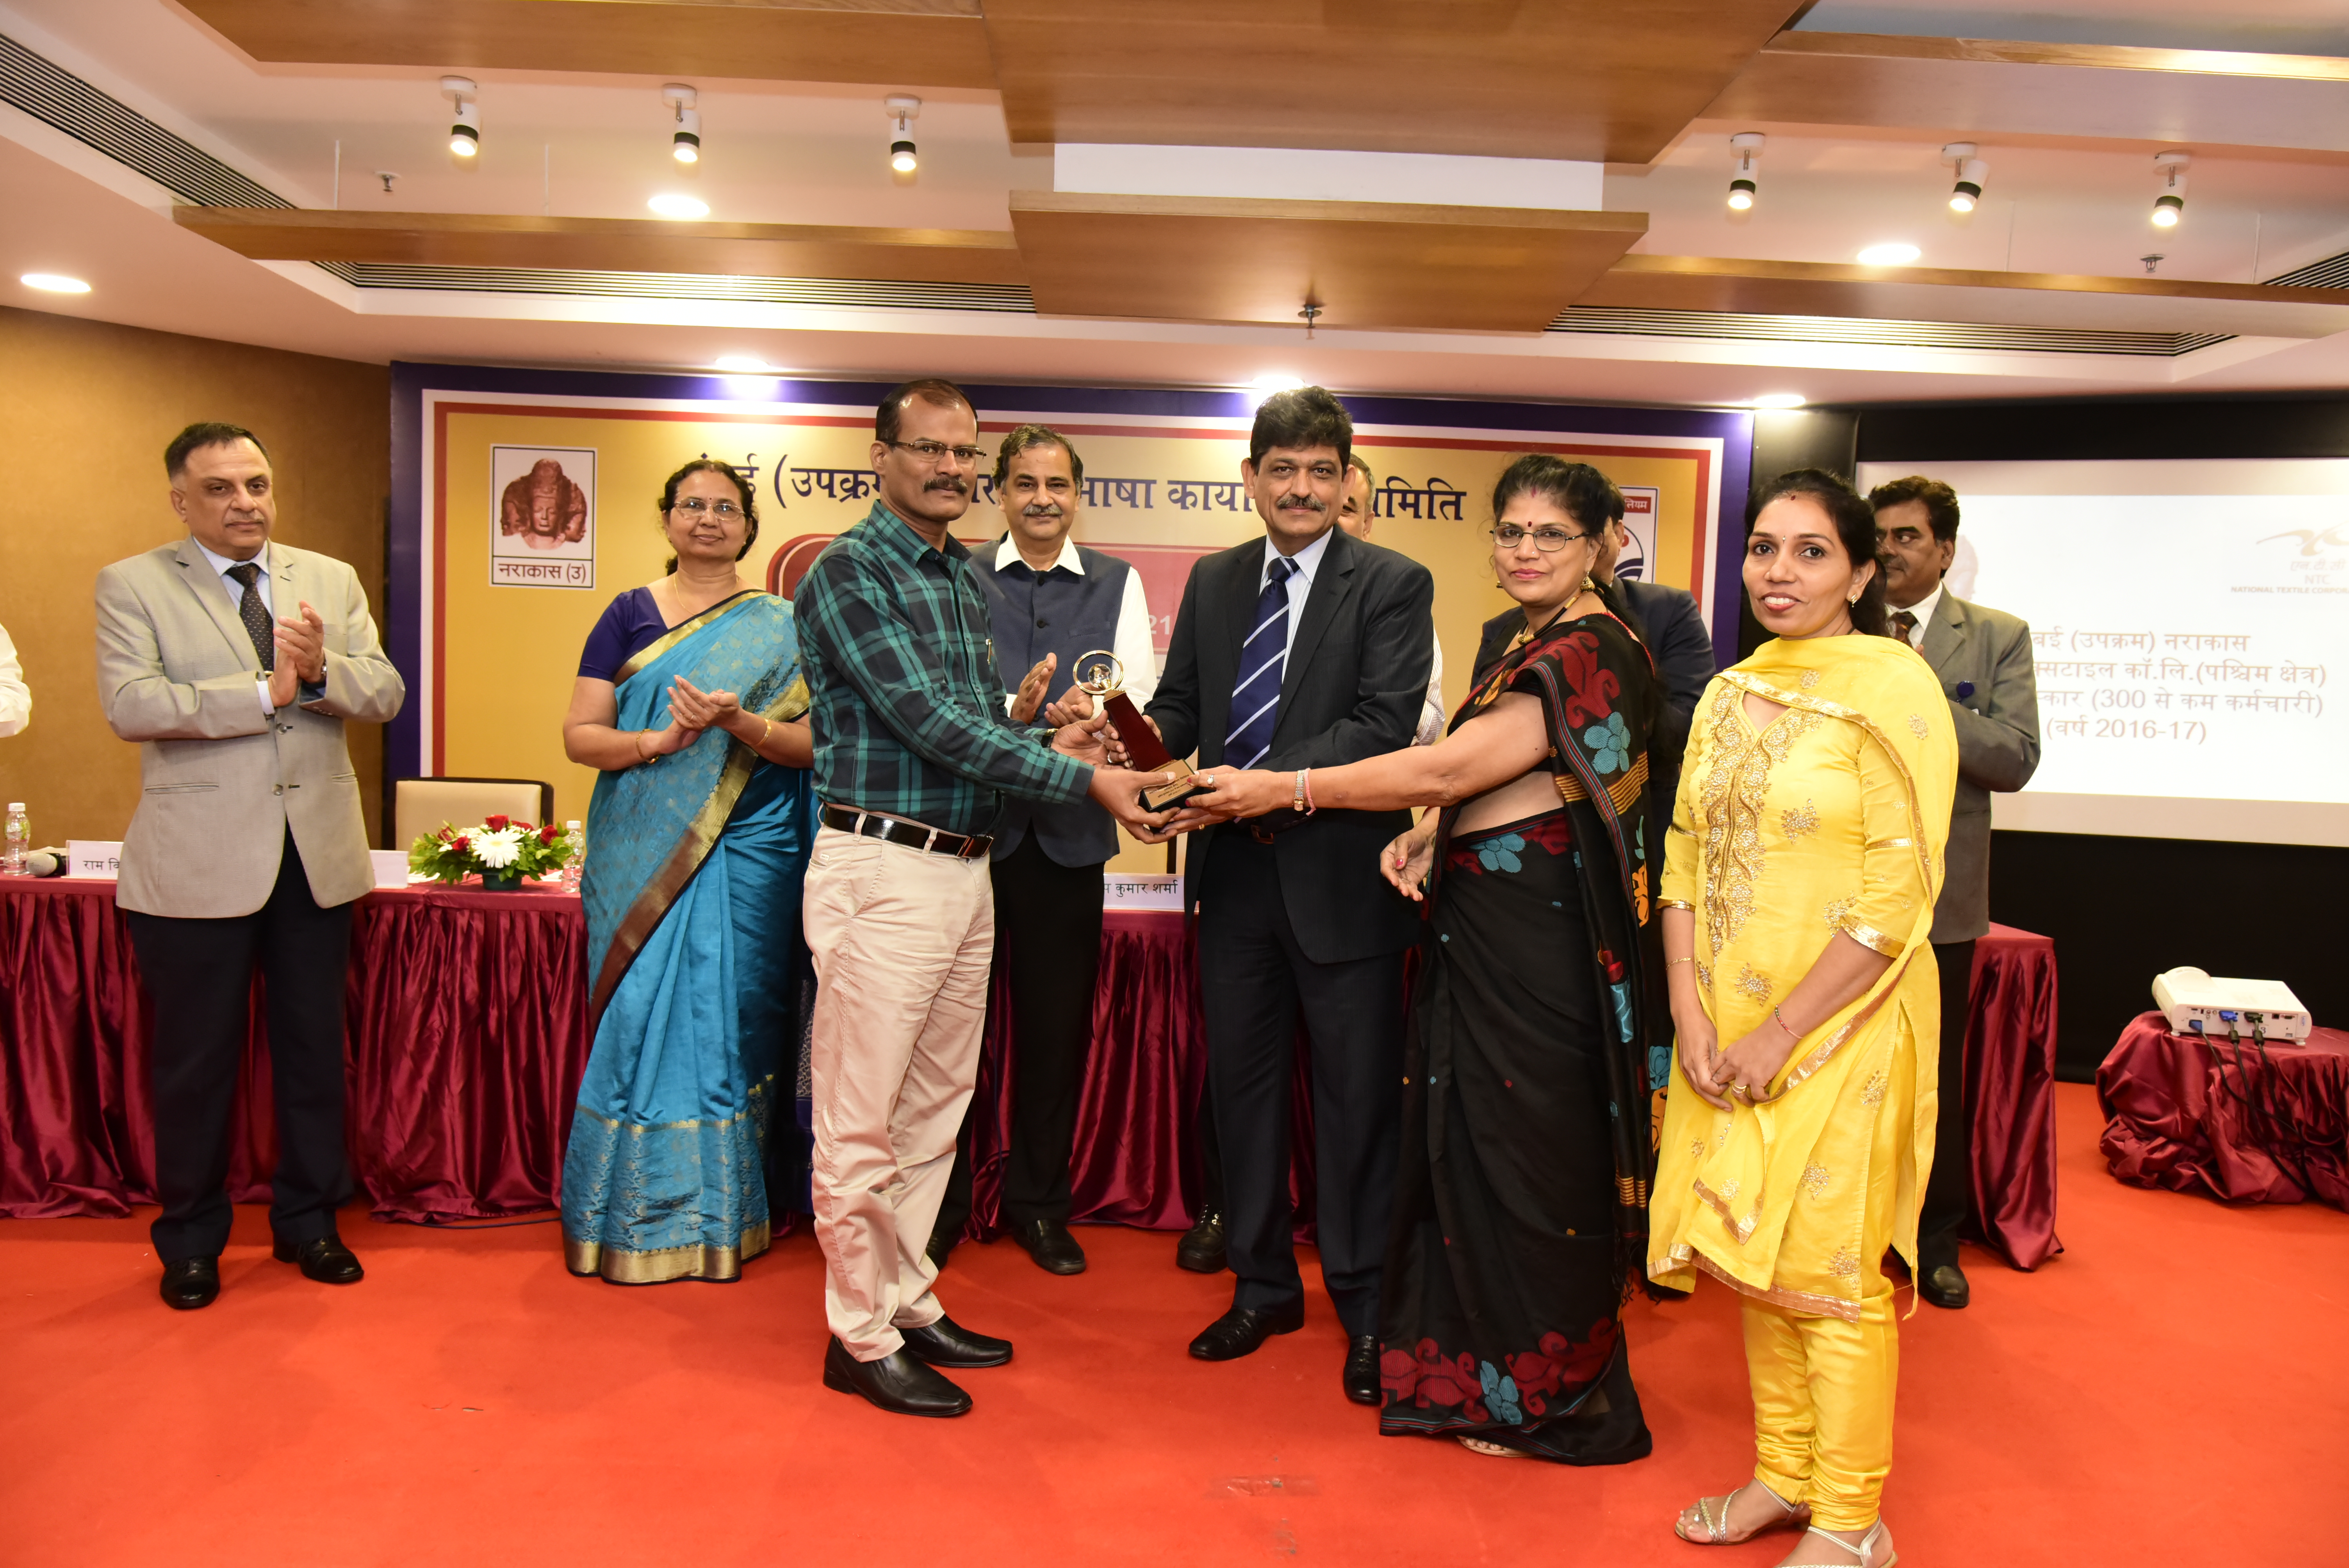 TOLIC 2016-17 : Western Regional Office, Mumbai, NTC Ltd has received the third award of the TOLIC for outstanding performance for the year 2016-17. This award was given by the President Sh. Mukesh Kumar Khurana on 21 July 2017. This award belongs to all the workers / employees of the corporation and the official category.